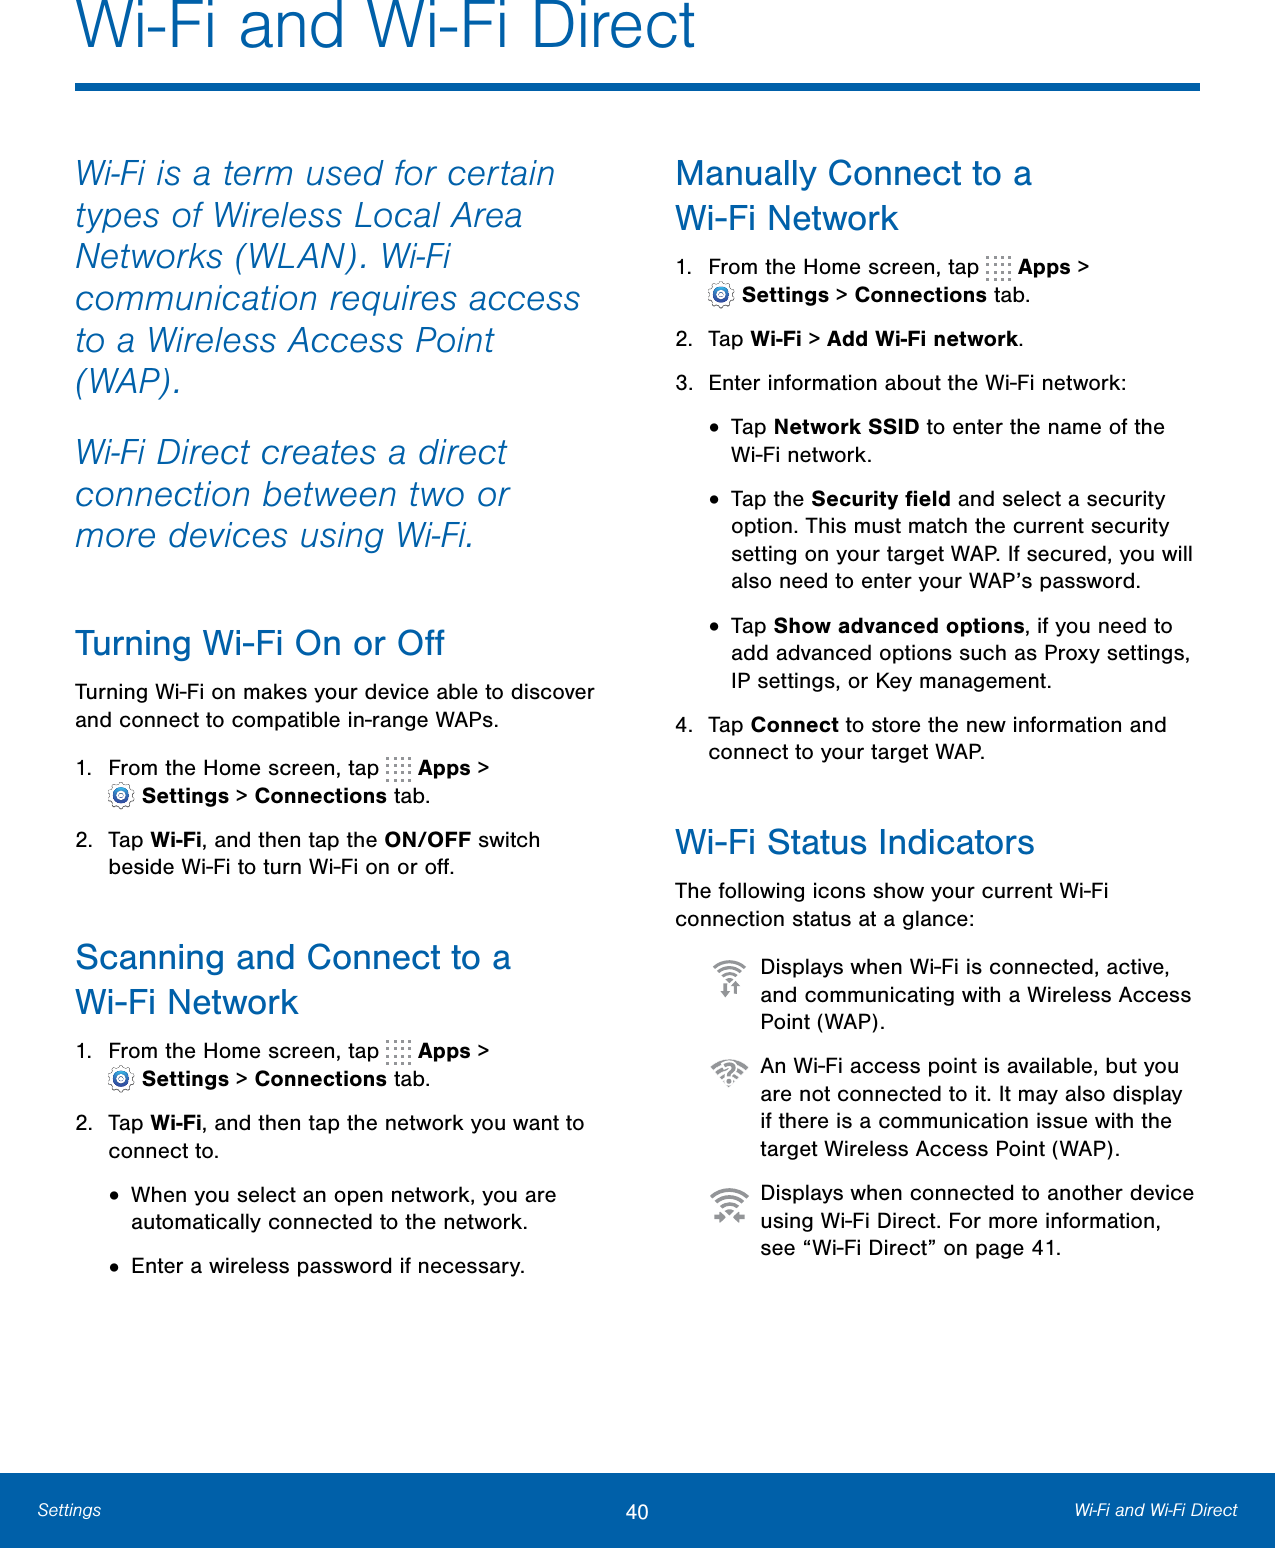 40 Wi-Fi and Wi-Fi DirectSettingsWi-Fi is a term used for certain types of Wireless Local Area Networks (WLAN). Wi-Fi communication requires access to a Wireless Access Point (WAP).Wi-Fi Direct creates a direct connection between two or more devices using Wi-Fi. Turning Wi-Fi On or OﬀTurning Wi-Fi on makes your device able to discover and connect to compatible in-range WAPs.1. From the Home screen, tap   Apps &gt;Settings &gt; Connections tab.2. Tap Wi-Fi, and then tap the ON/OFF switchbeside Wi-Fi to turn Wi-Fi on or oﬀ.Scanning and Connect to a Wi-Fi Network1. From the Home screen, tap   Apps &gt;Settings &gt; Connections tab.2. Tap Wi-Fi, and then tap the network you want toconnect to.•When you select an open network, you areautomatically connected to the network.•Enter a wireless password if necessary.Manually Connect to a Wi-FiNetwork1. From the Home screen, tap   Apps &gt;Settings &gt; Connections tab.2. Tap Wi-Fi &gt; Add Wi-Fi network.3. Enter information about the Wi-Fi network:•Tap Network SSID to enter the name of theWi-Fi network.•Tap the Security ﬁeld and select a securityoption. This must match the current securitysetting on your target WAP. If secured, you willalso need to enter your WAP’s password.•Tap Show advanced options, if you need toadd advanced options such as Proxy settings,IPsettings, or Key management.4. Tap Connect to store the new information andconnect to your target WAP.Wi-Fi Status IndicatorsThe following icons show your current Wi-Fi connection status at a glance:  Displays when Wi-Fi is connected, active, and communicating with a Wireless Access Point (WAP).  An Wi-Fi access point is available, but you are not connected to it. It may also display if there is a communication issue with the target Wireless Access Point (WAP).  Displays when connected to another device using Wi-Fi Direct. For more information, see “Wi-Fi Direct” on page41.Wi-Fi and Wi-Fi Direct